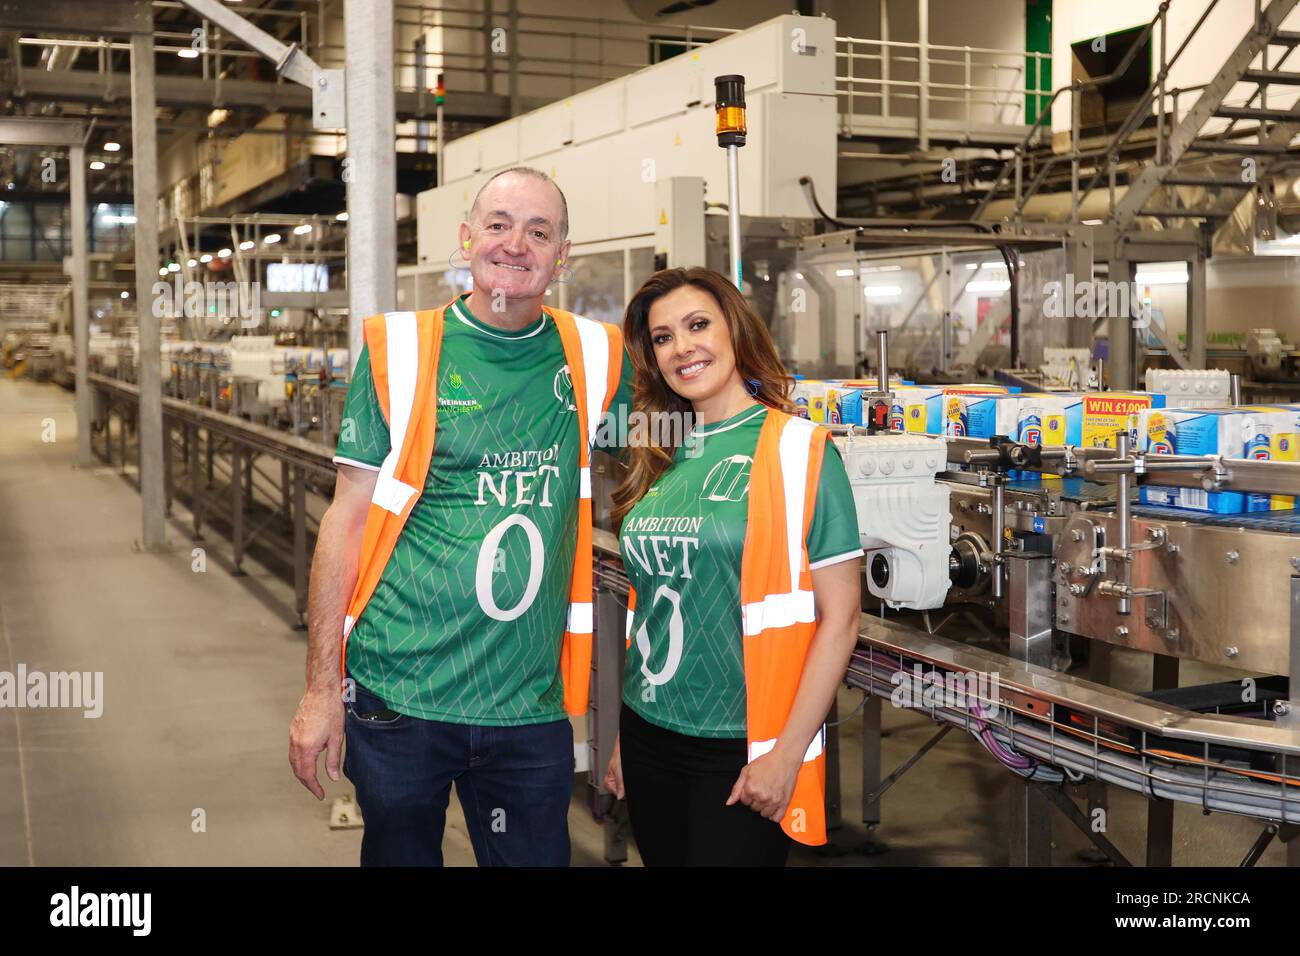 EDITORIAL USE ONLY Manchester United fan, Kym Marsh and Manchester City fan, Craig Cash put their differences aside and don green shirts during a tour of HEINEKEN UK's flagship Manchester brewery to celebrate a £25m investment into the brewery in support of the company's global net zero 2030 ambitions. Issue date: Sunday July 16, 2023. Stock Photo